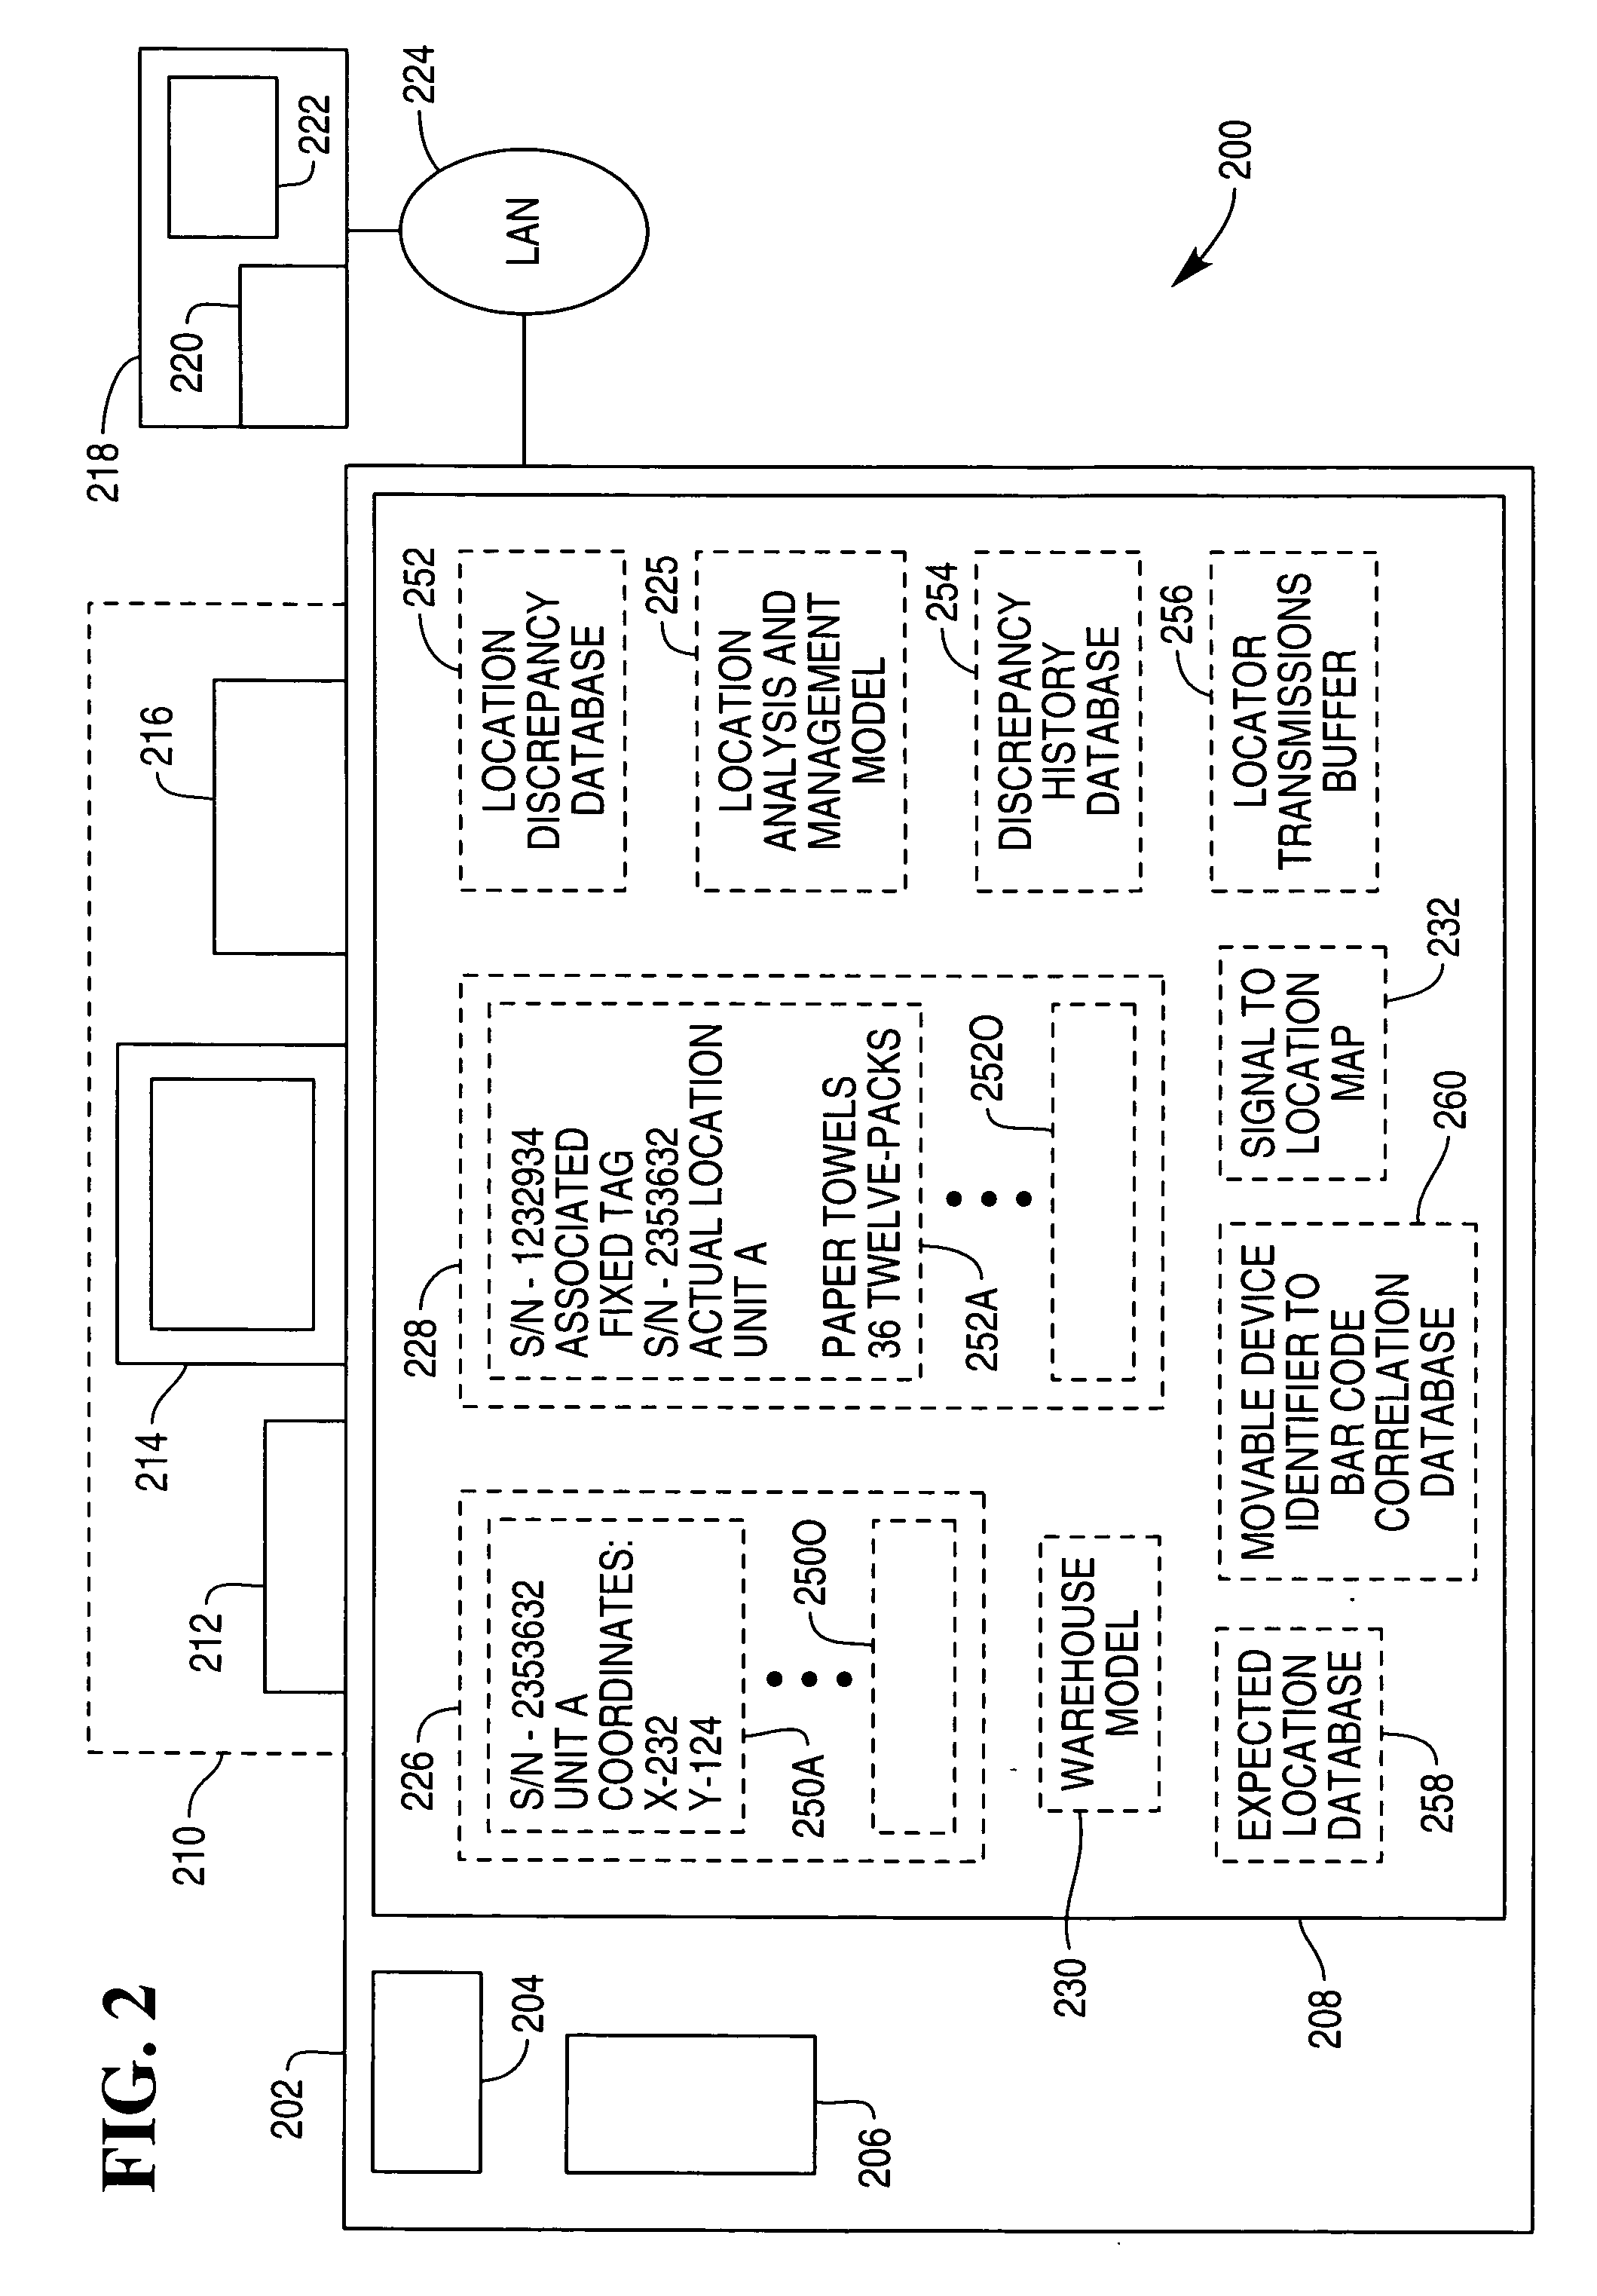 Methods and apparatus for managing location information for movable objects